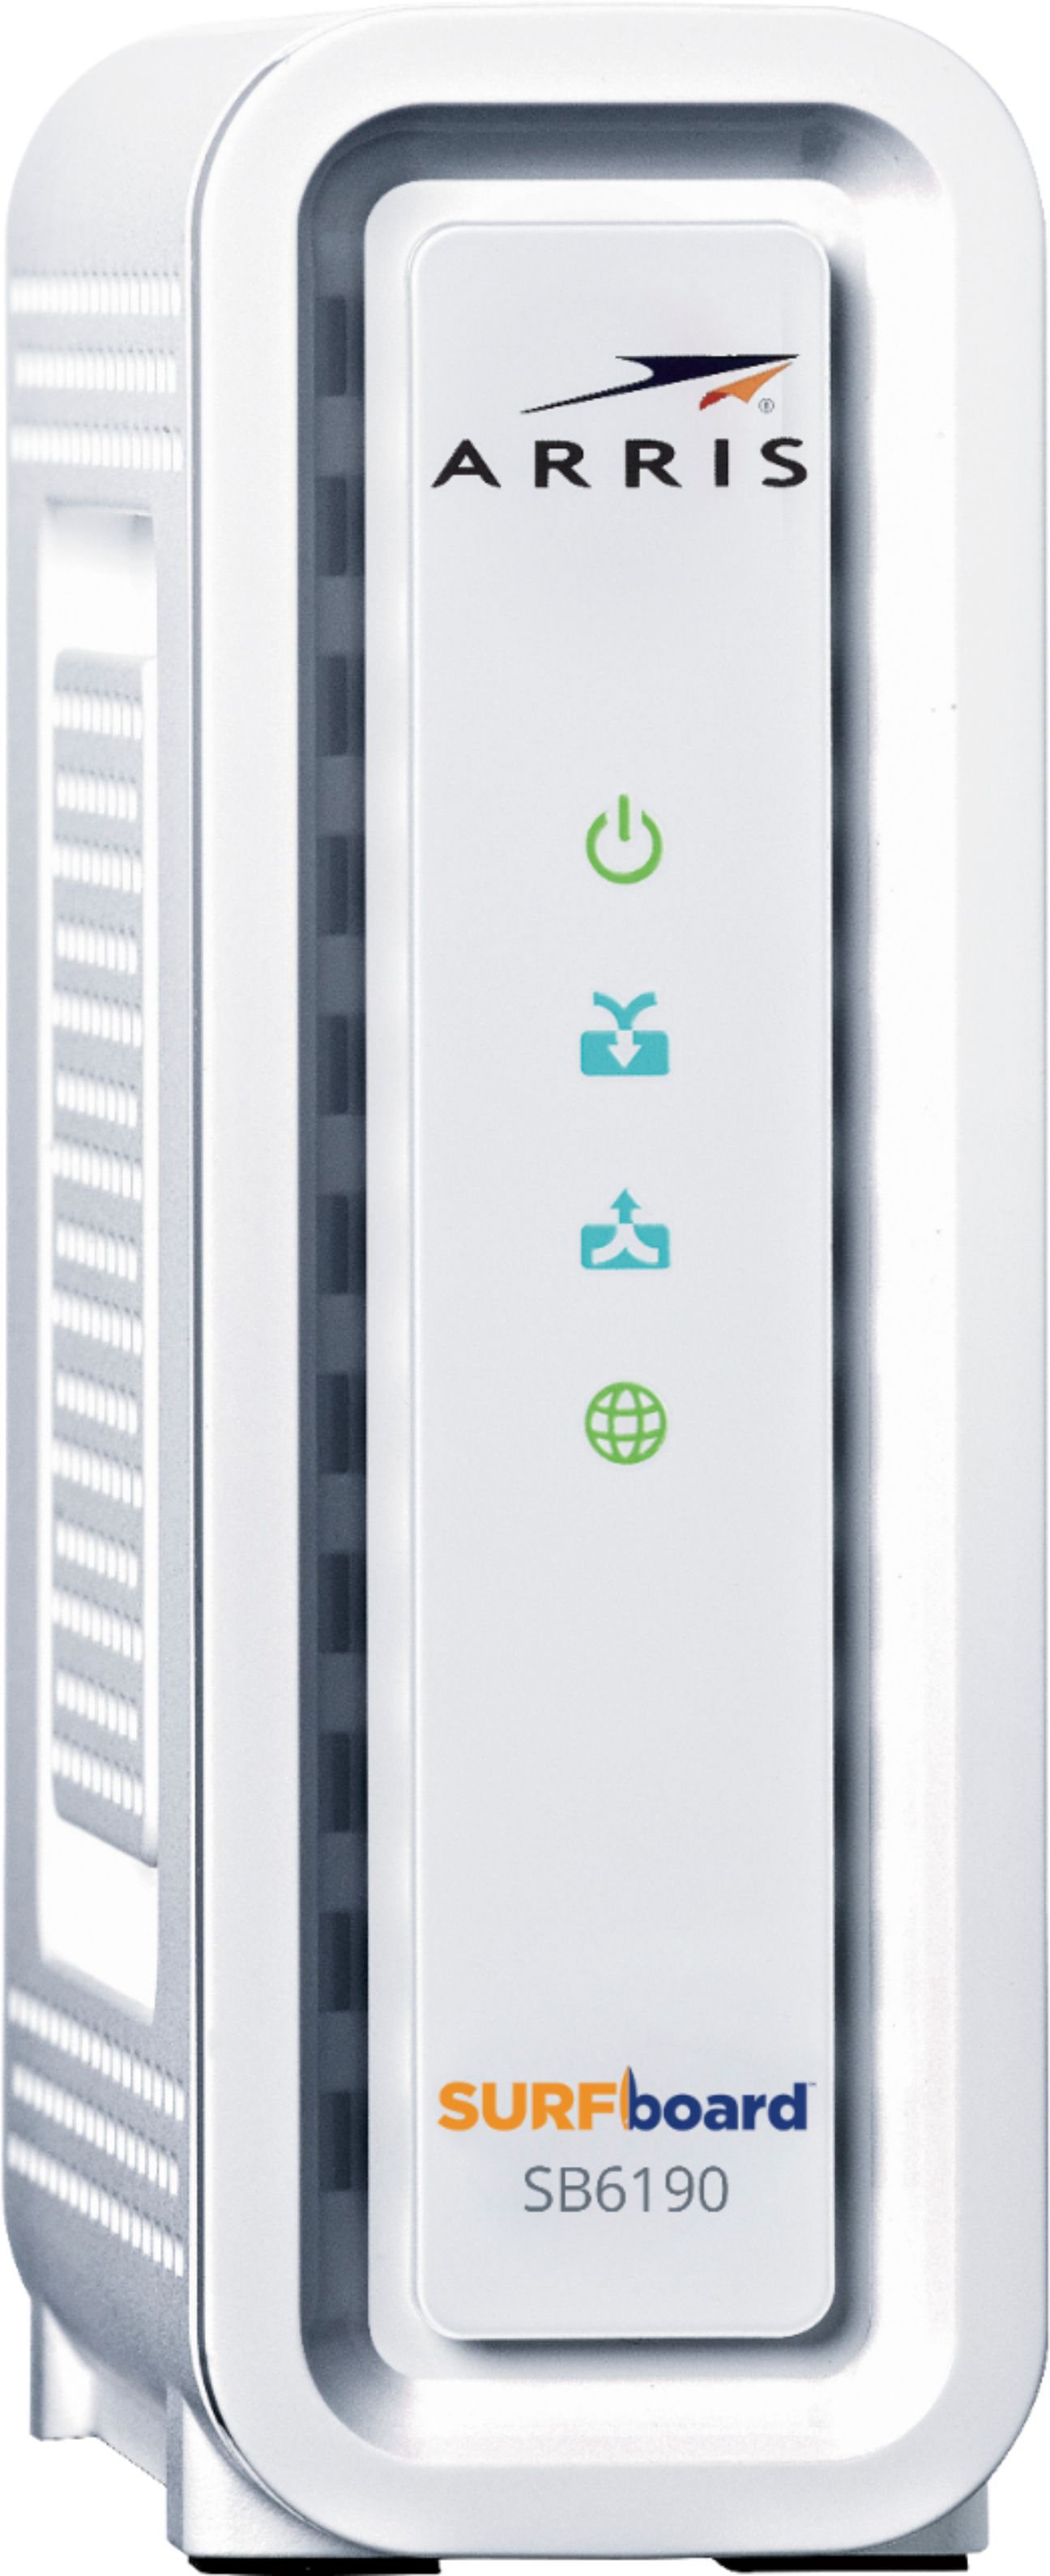 Angle View: ARRIS - SURFboard SB6190 32 x 8 DOCSIS 3.0 Cable Modem - White